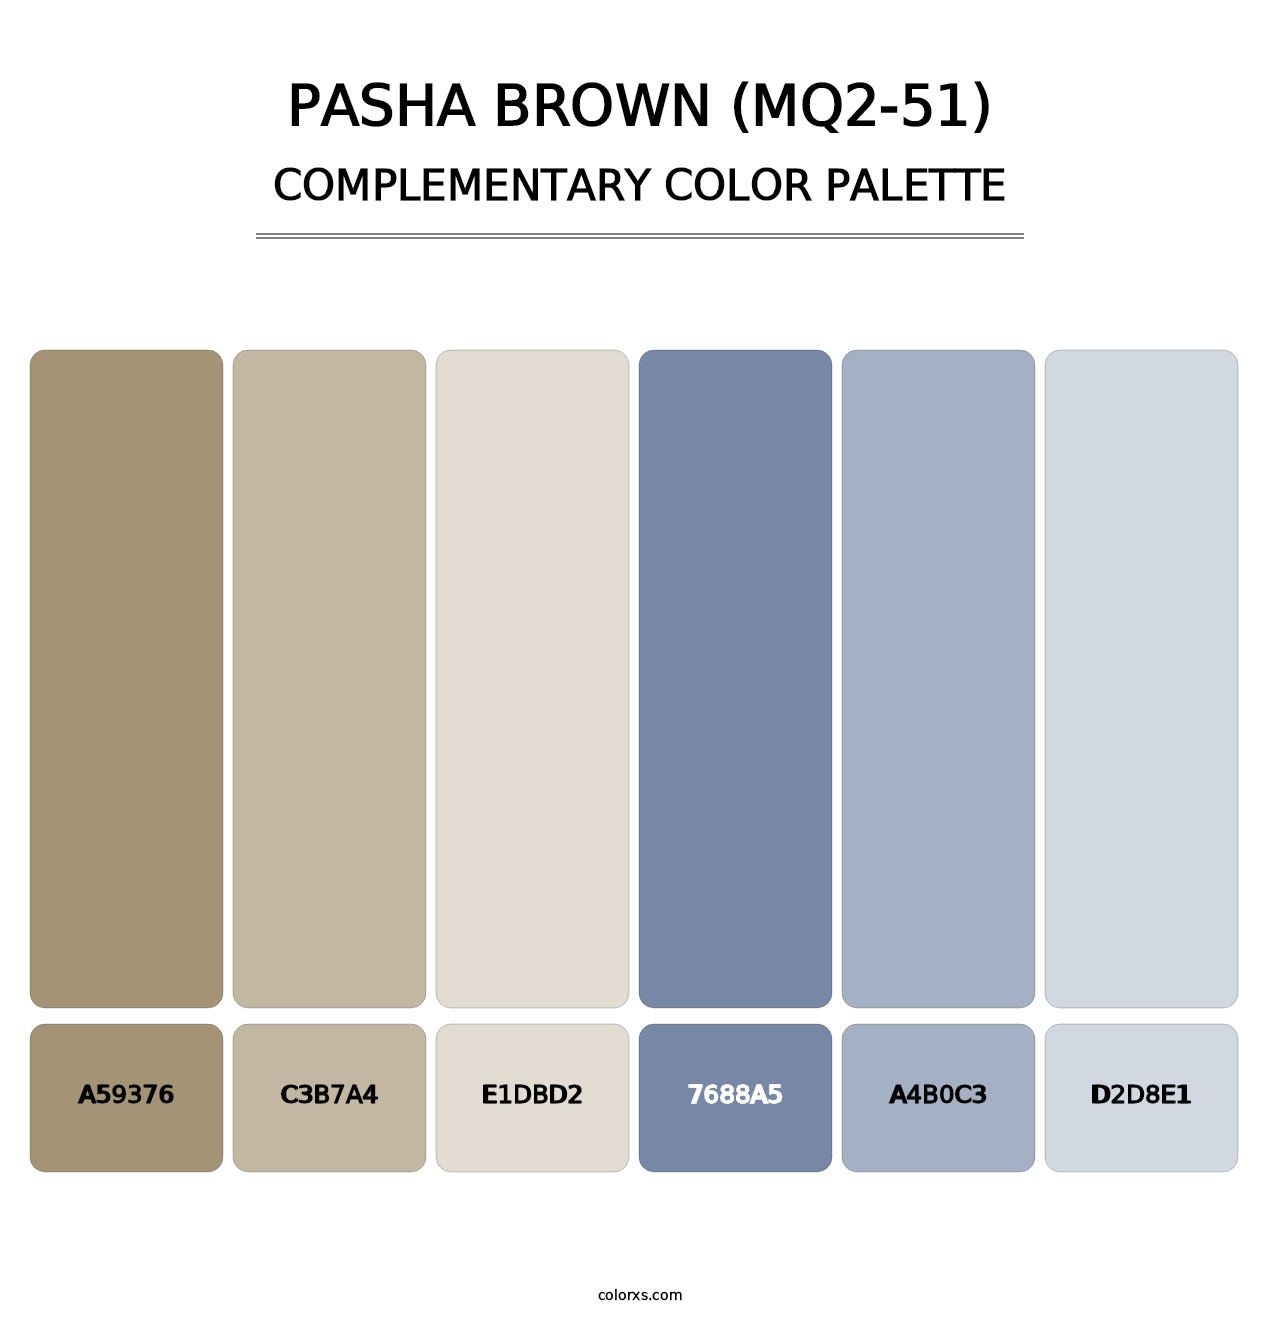 Pasha Brown (MQ2-51) - Complementary Color Palette